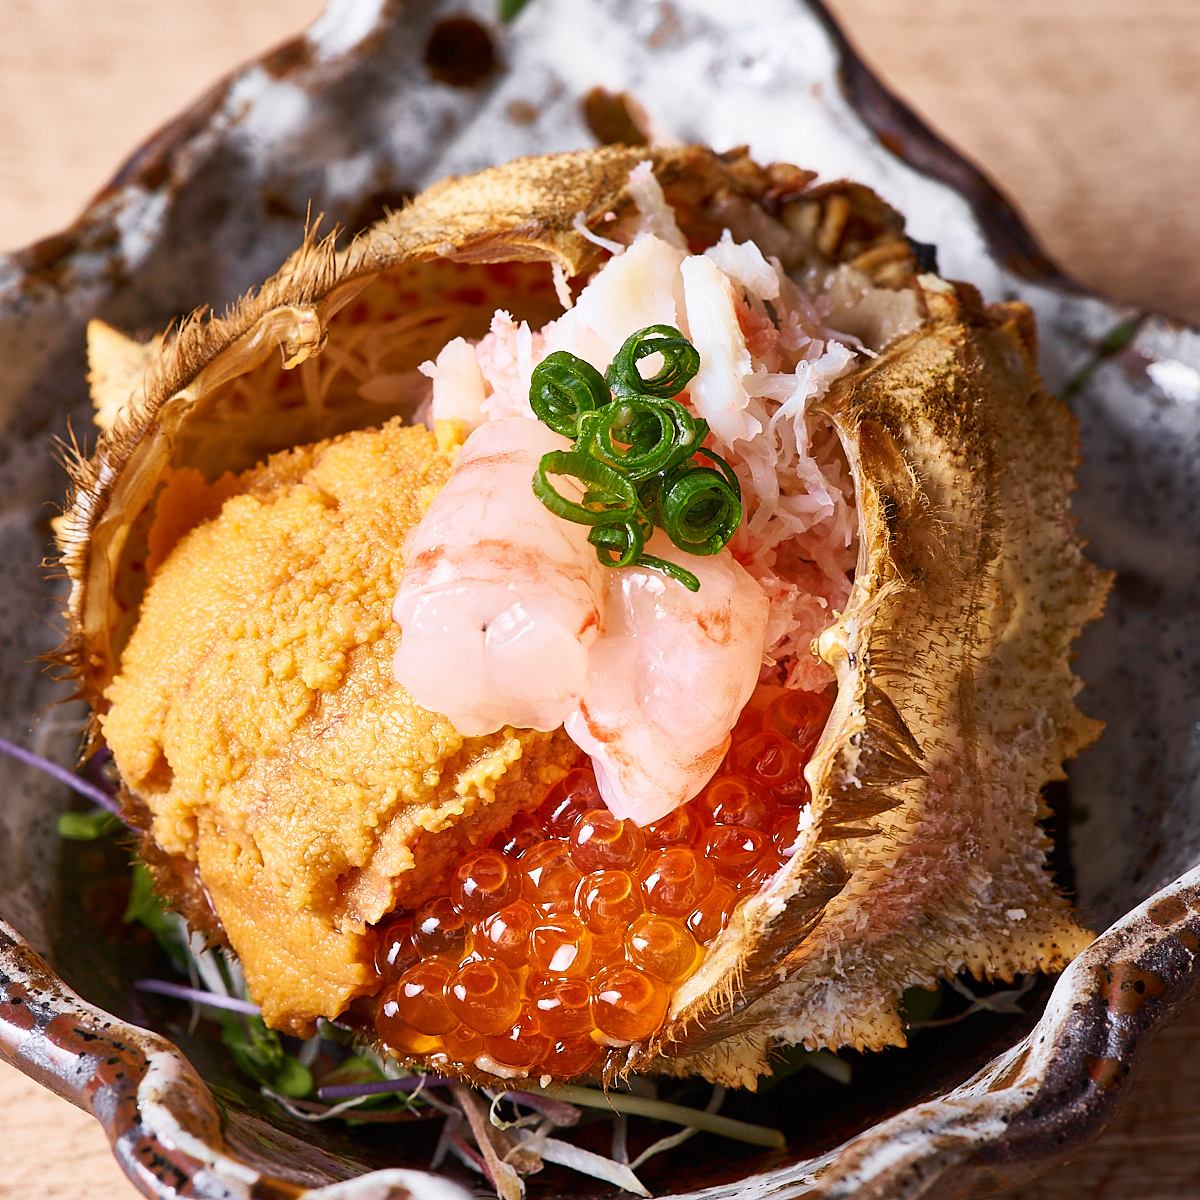 OPEN in Shinjuku 3-chome !! Enjoy a variety of exquisite dishes!